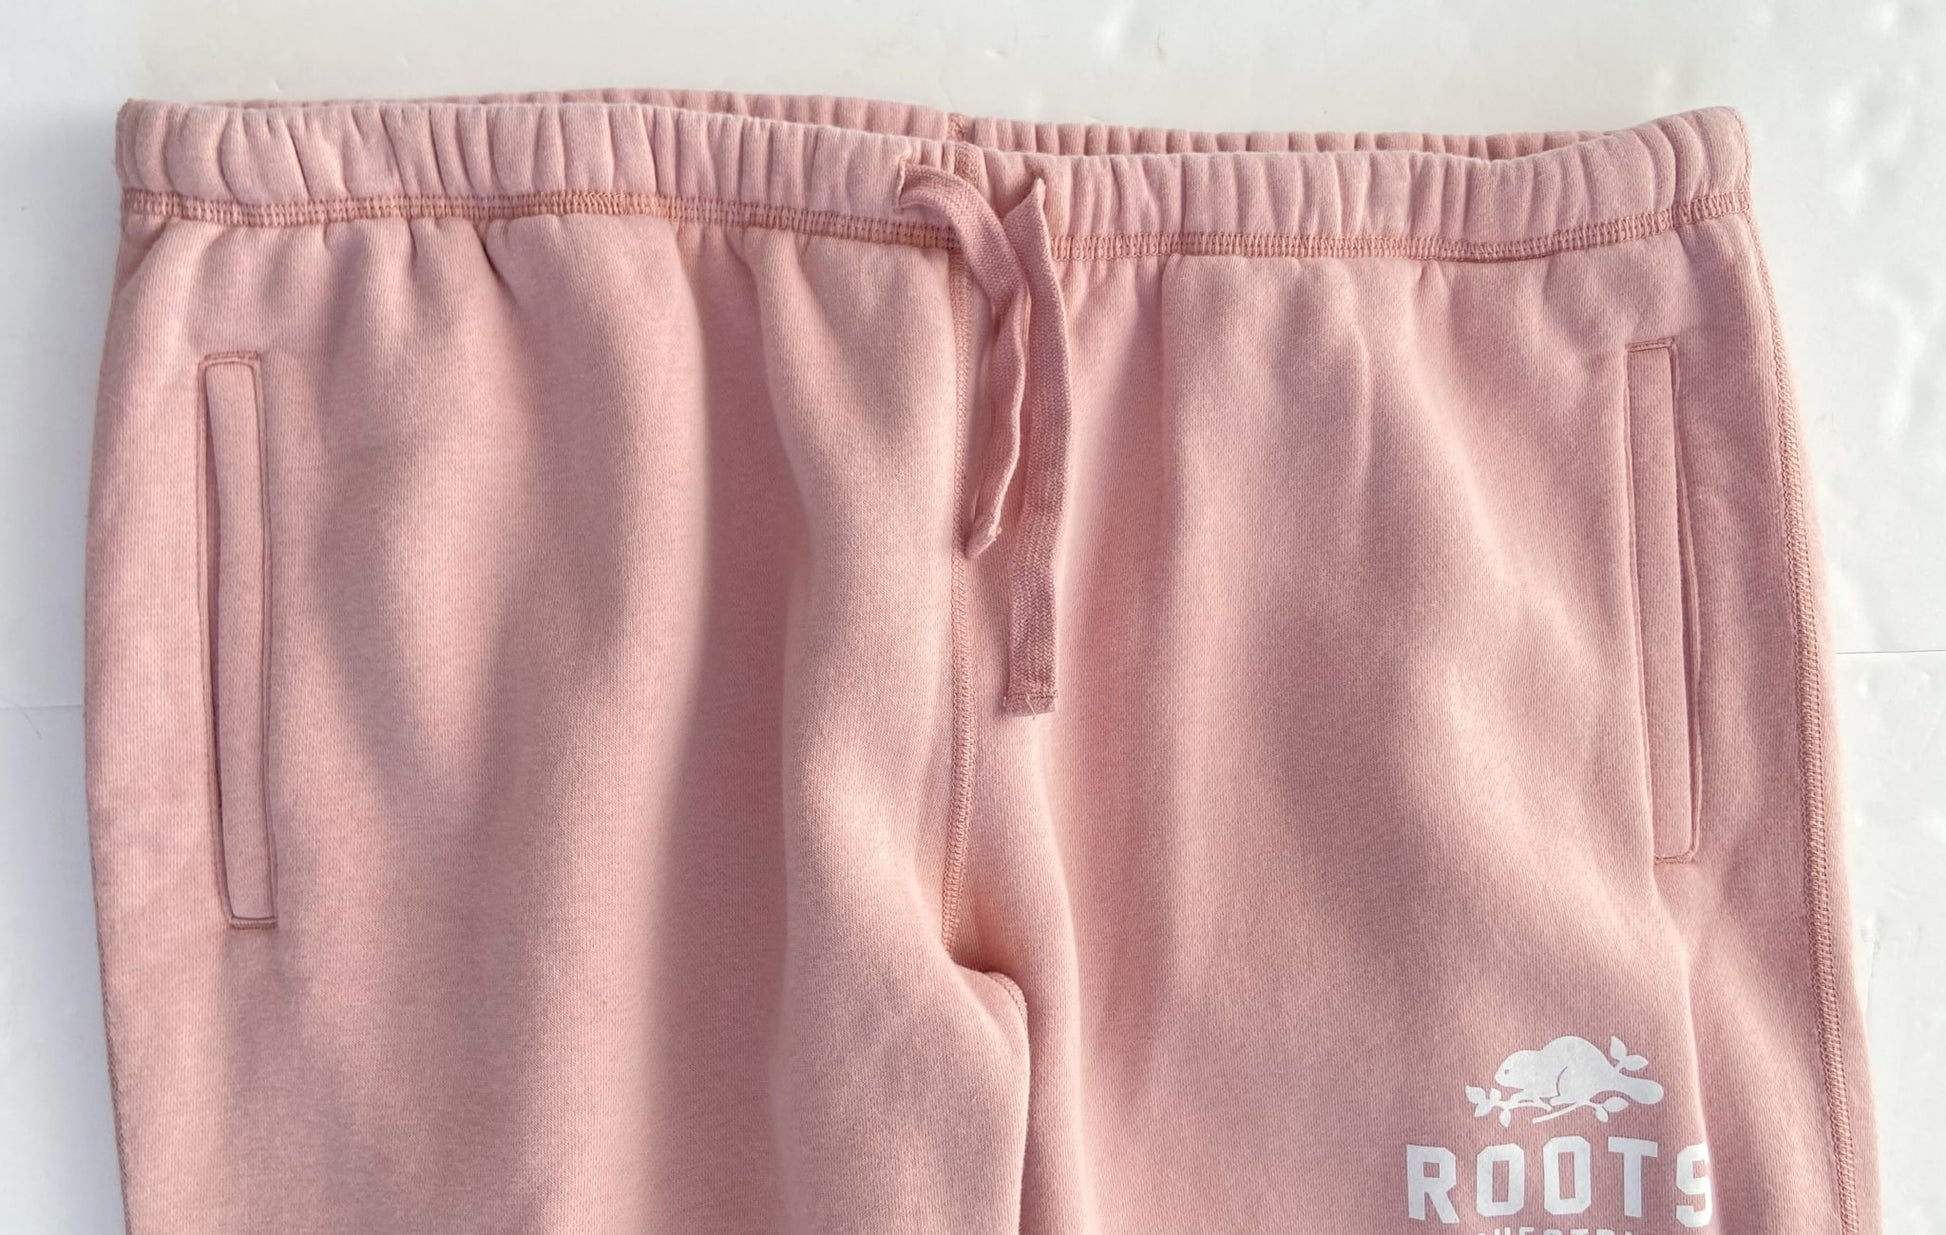 Roots Equestrian Sweatpants - Light Pink - Women's XL – THE STANDBY LIST